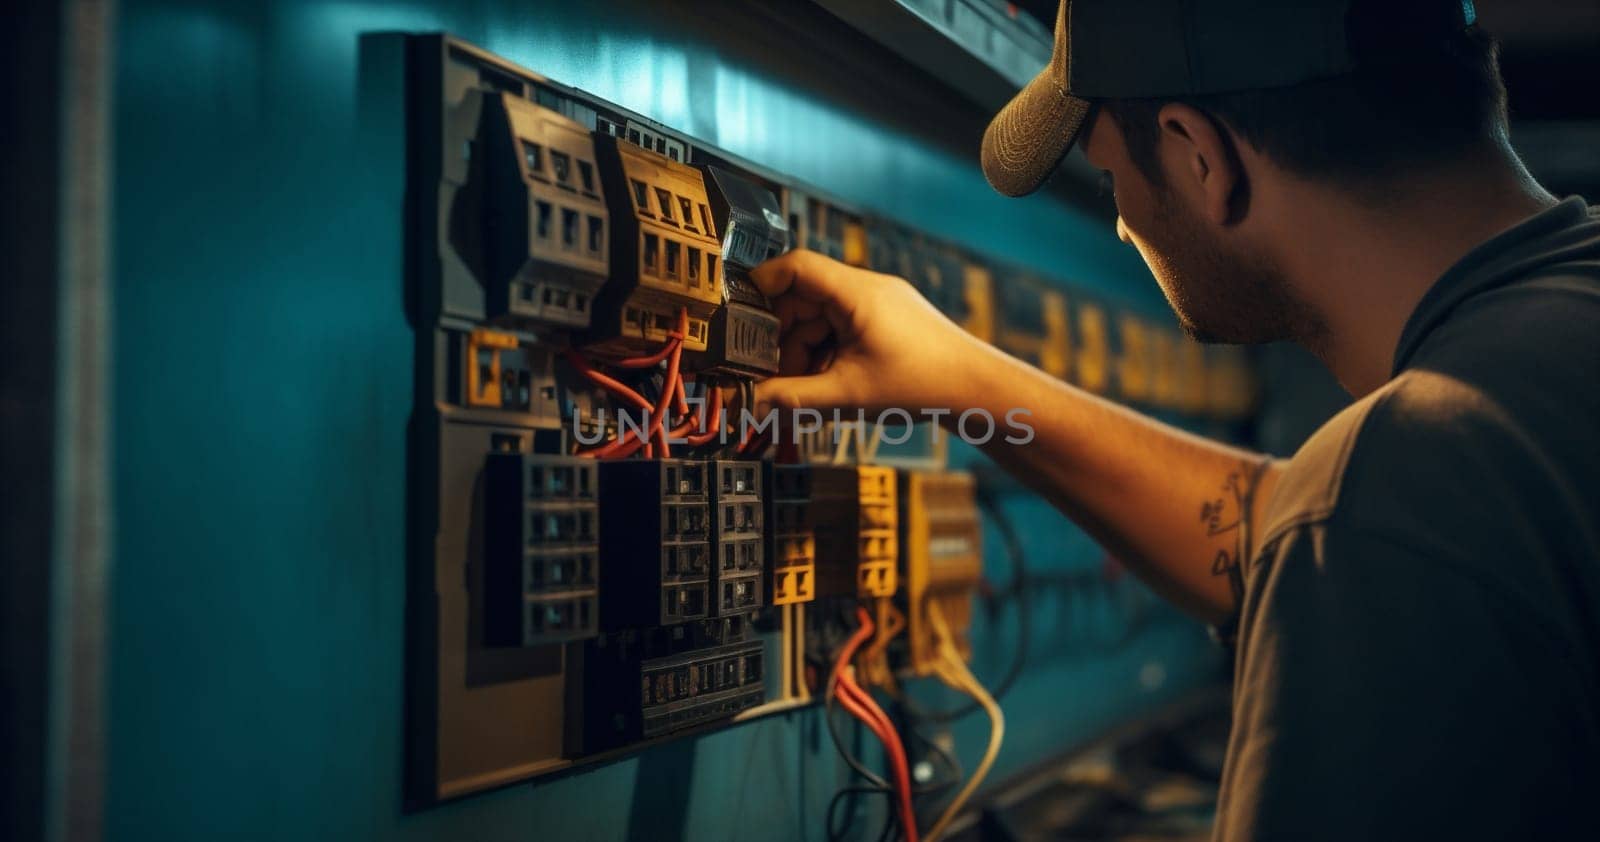 Man industrial technician power engineer professional repairman cabling equipment inspector installing check electricity worker electrician working maintenance construction repairing